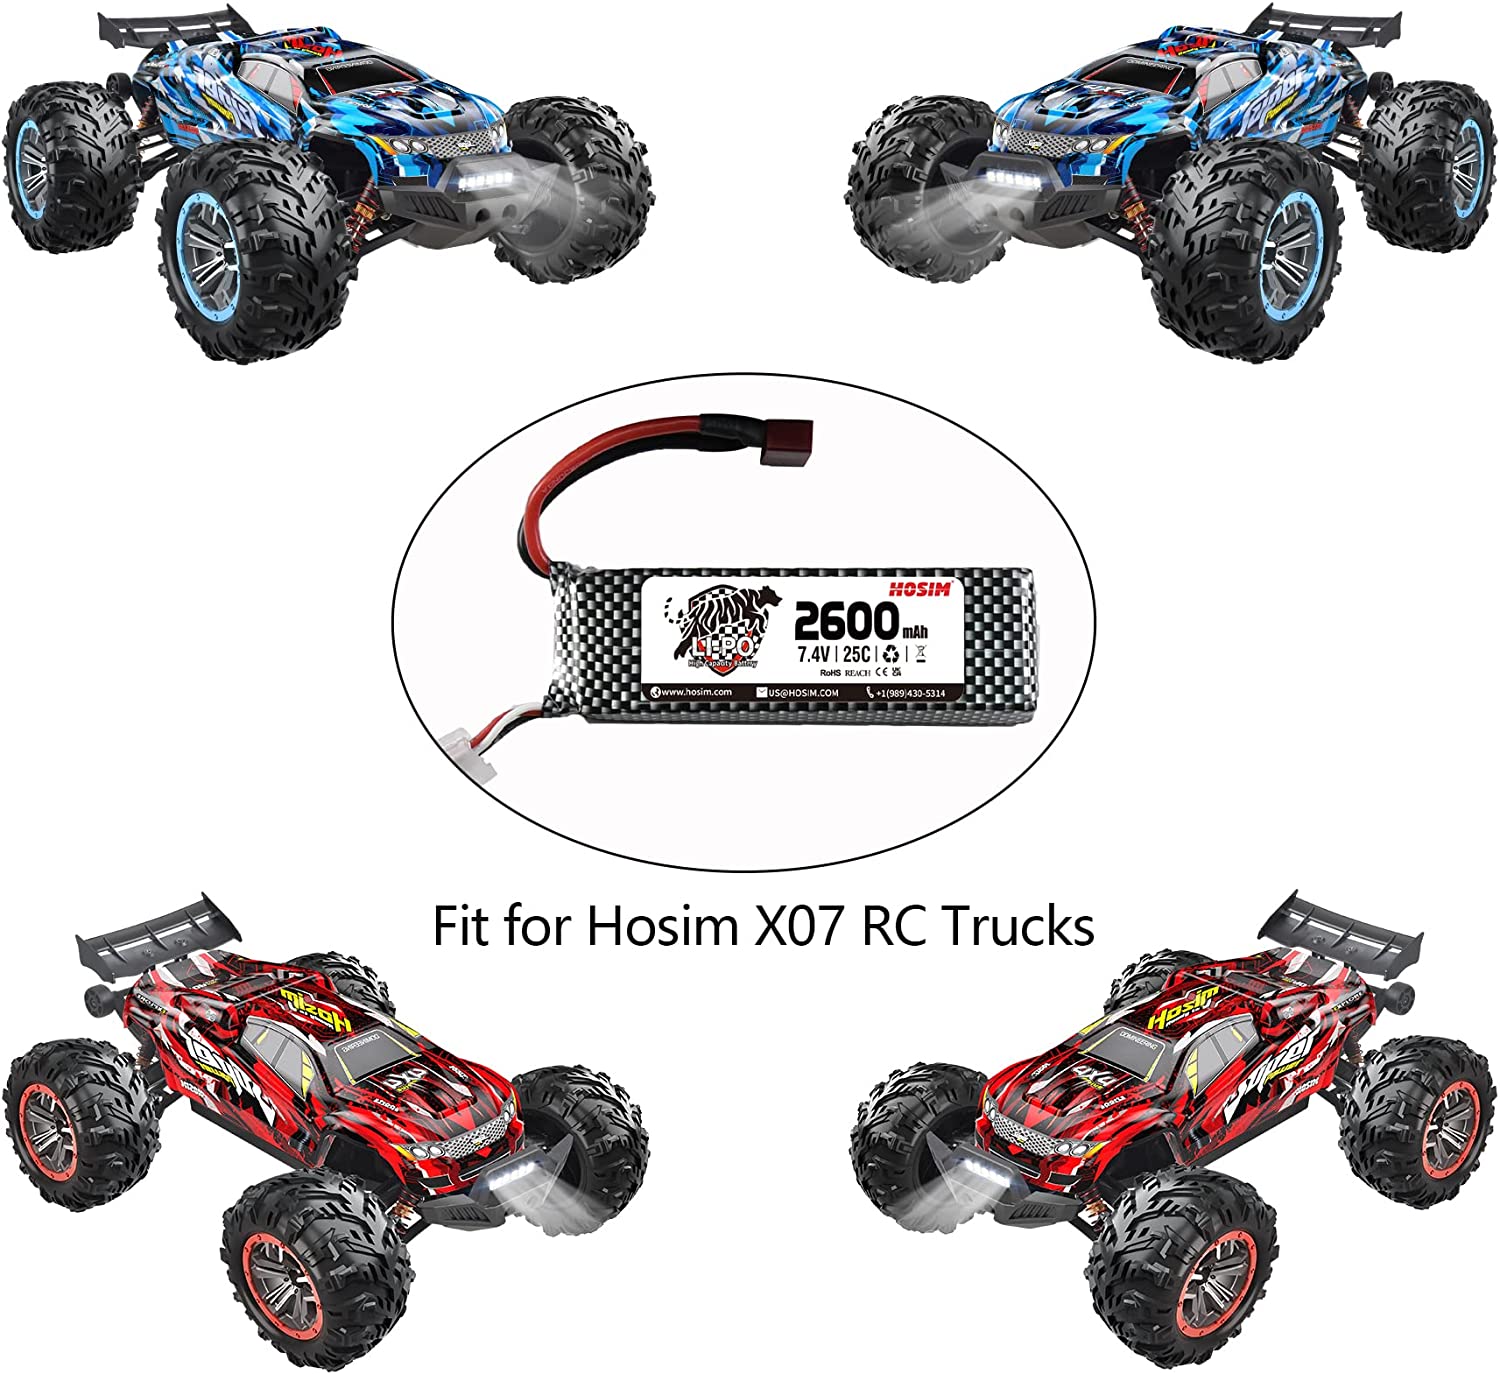 Hosim 1:10 Scale RC Cars Replacement 7.4V 2600mAh Battery Use for High Speed RC Truck X07 X08